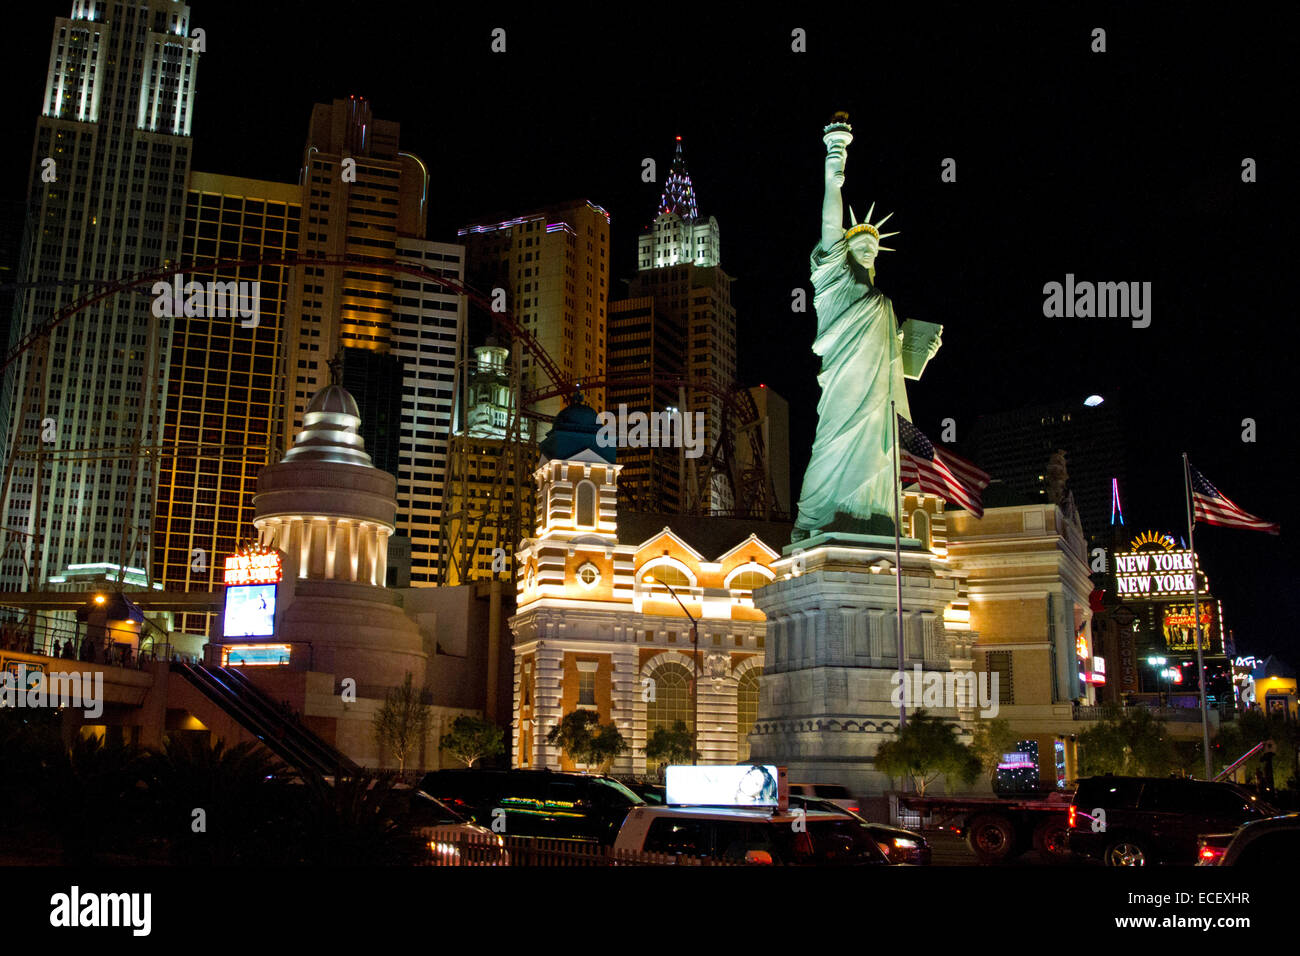 New York Hotel and Casino with Statue of Liberty illuminated at night along Las Vegas Strip, Clark County, Nevada in July Stock Photo